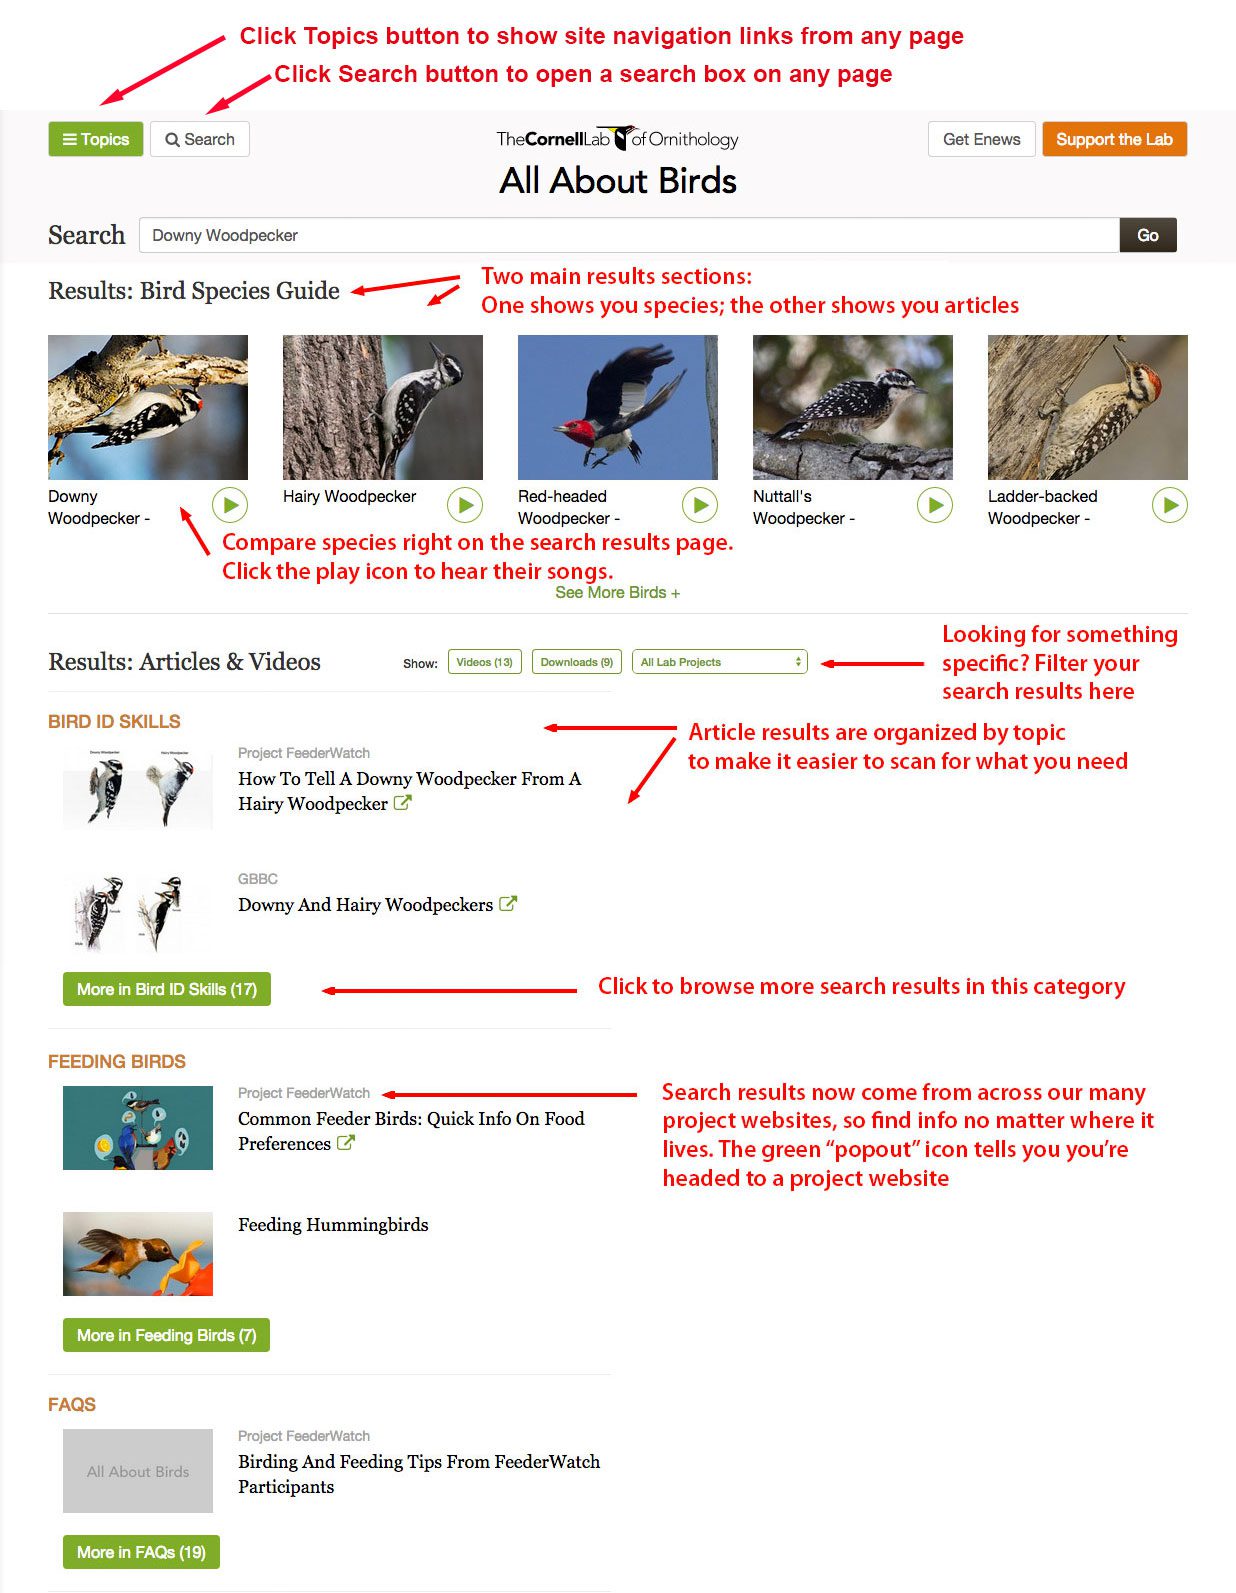 new features added to All About Birds search page